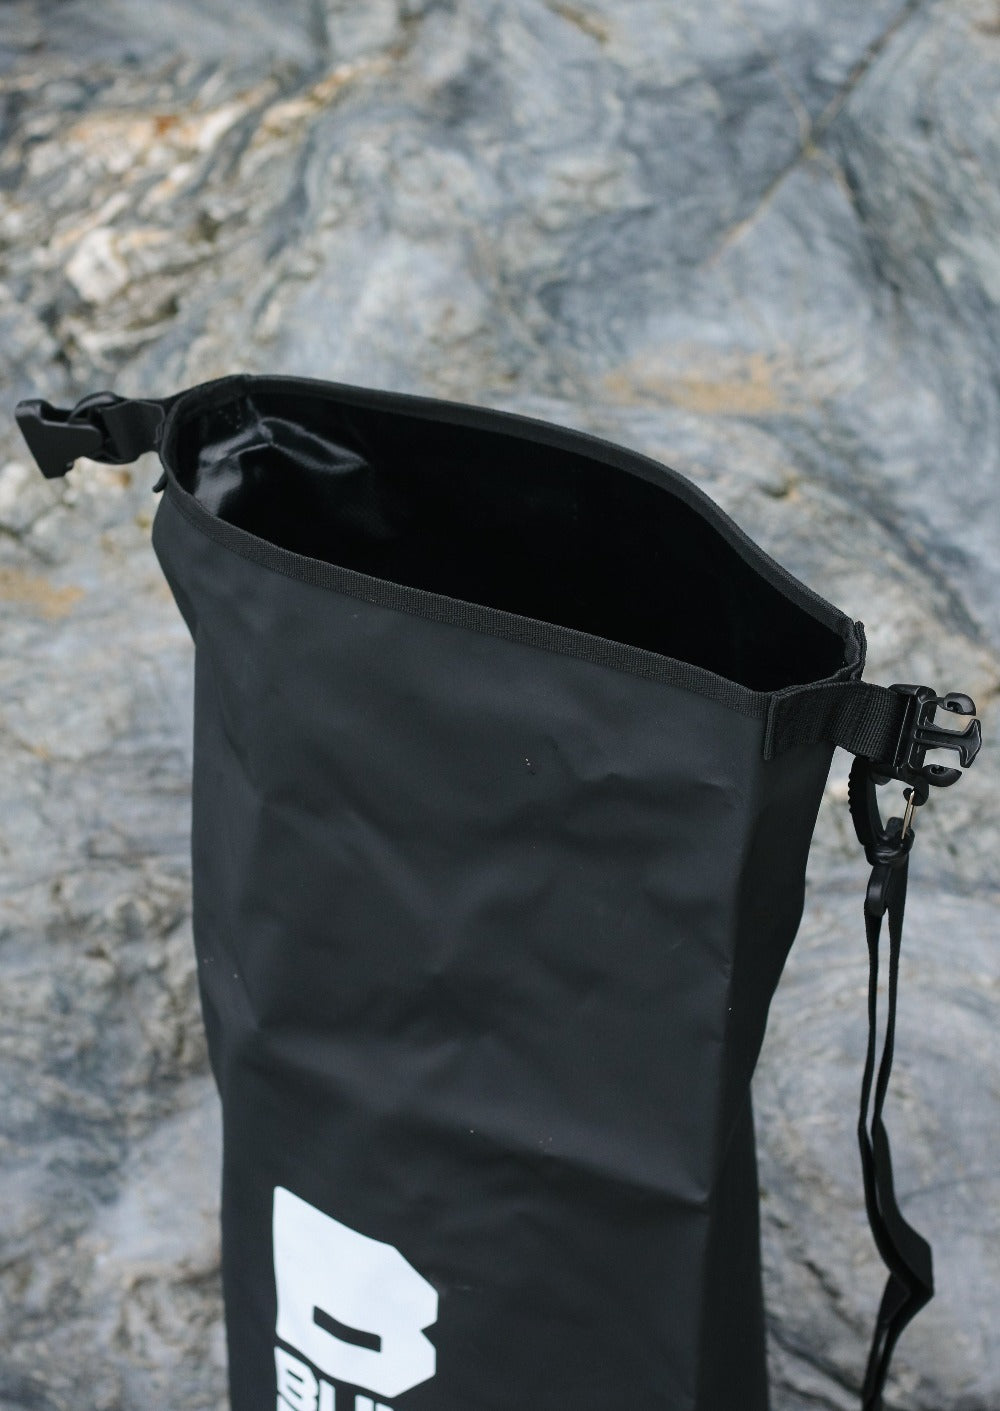 Load image into Gallery viewer, Dry Barrel Bag 20L by Bulldog
